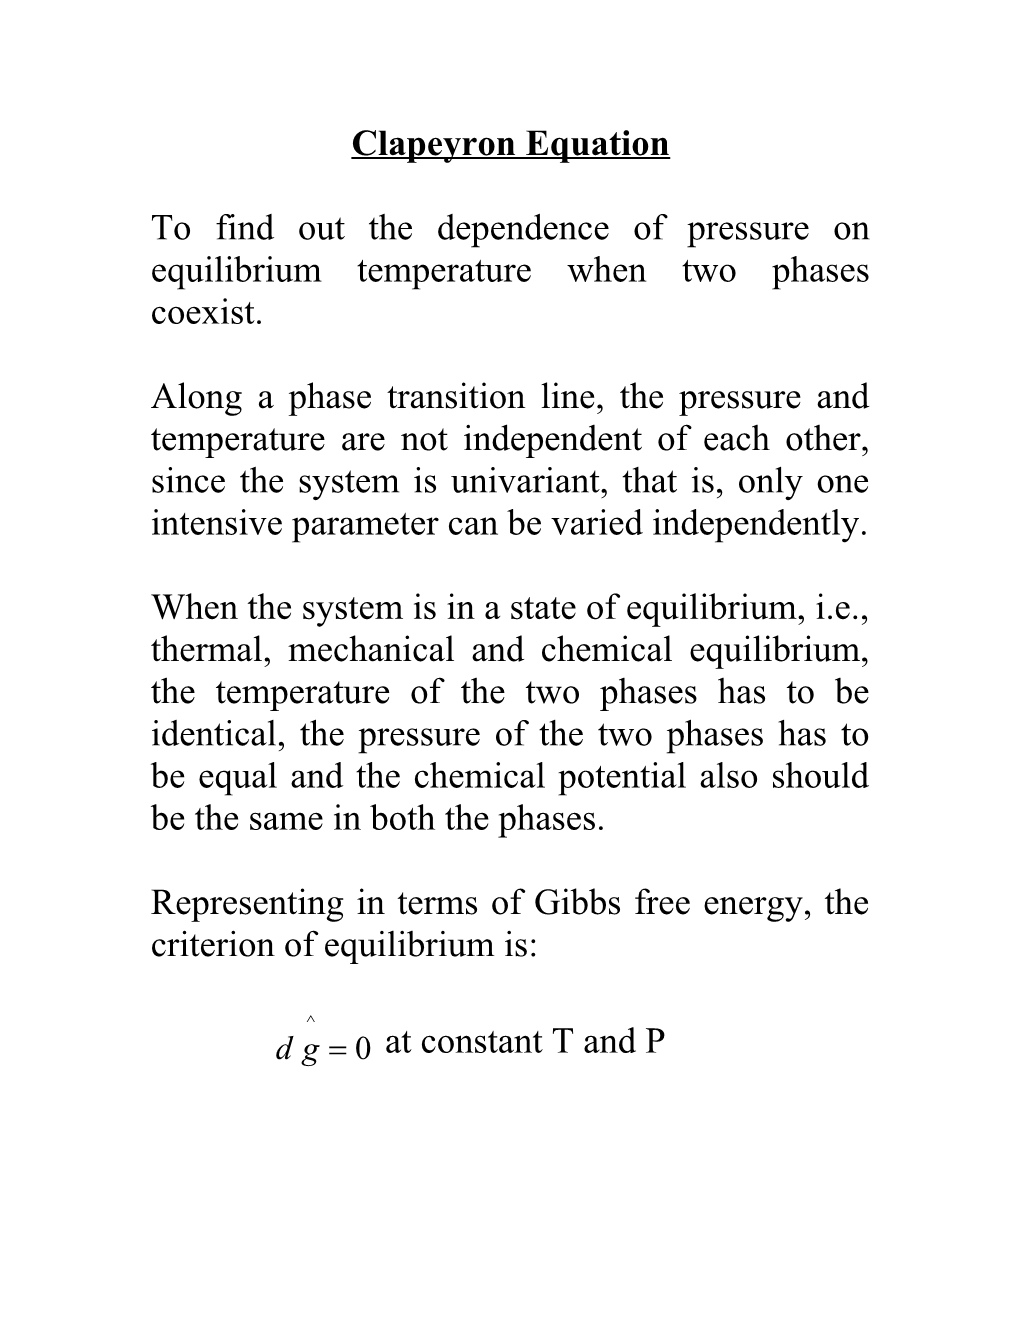 To Find out the Dependence of Pressure on Equilibrium Temperature When Two Phases Coexist